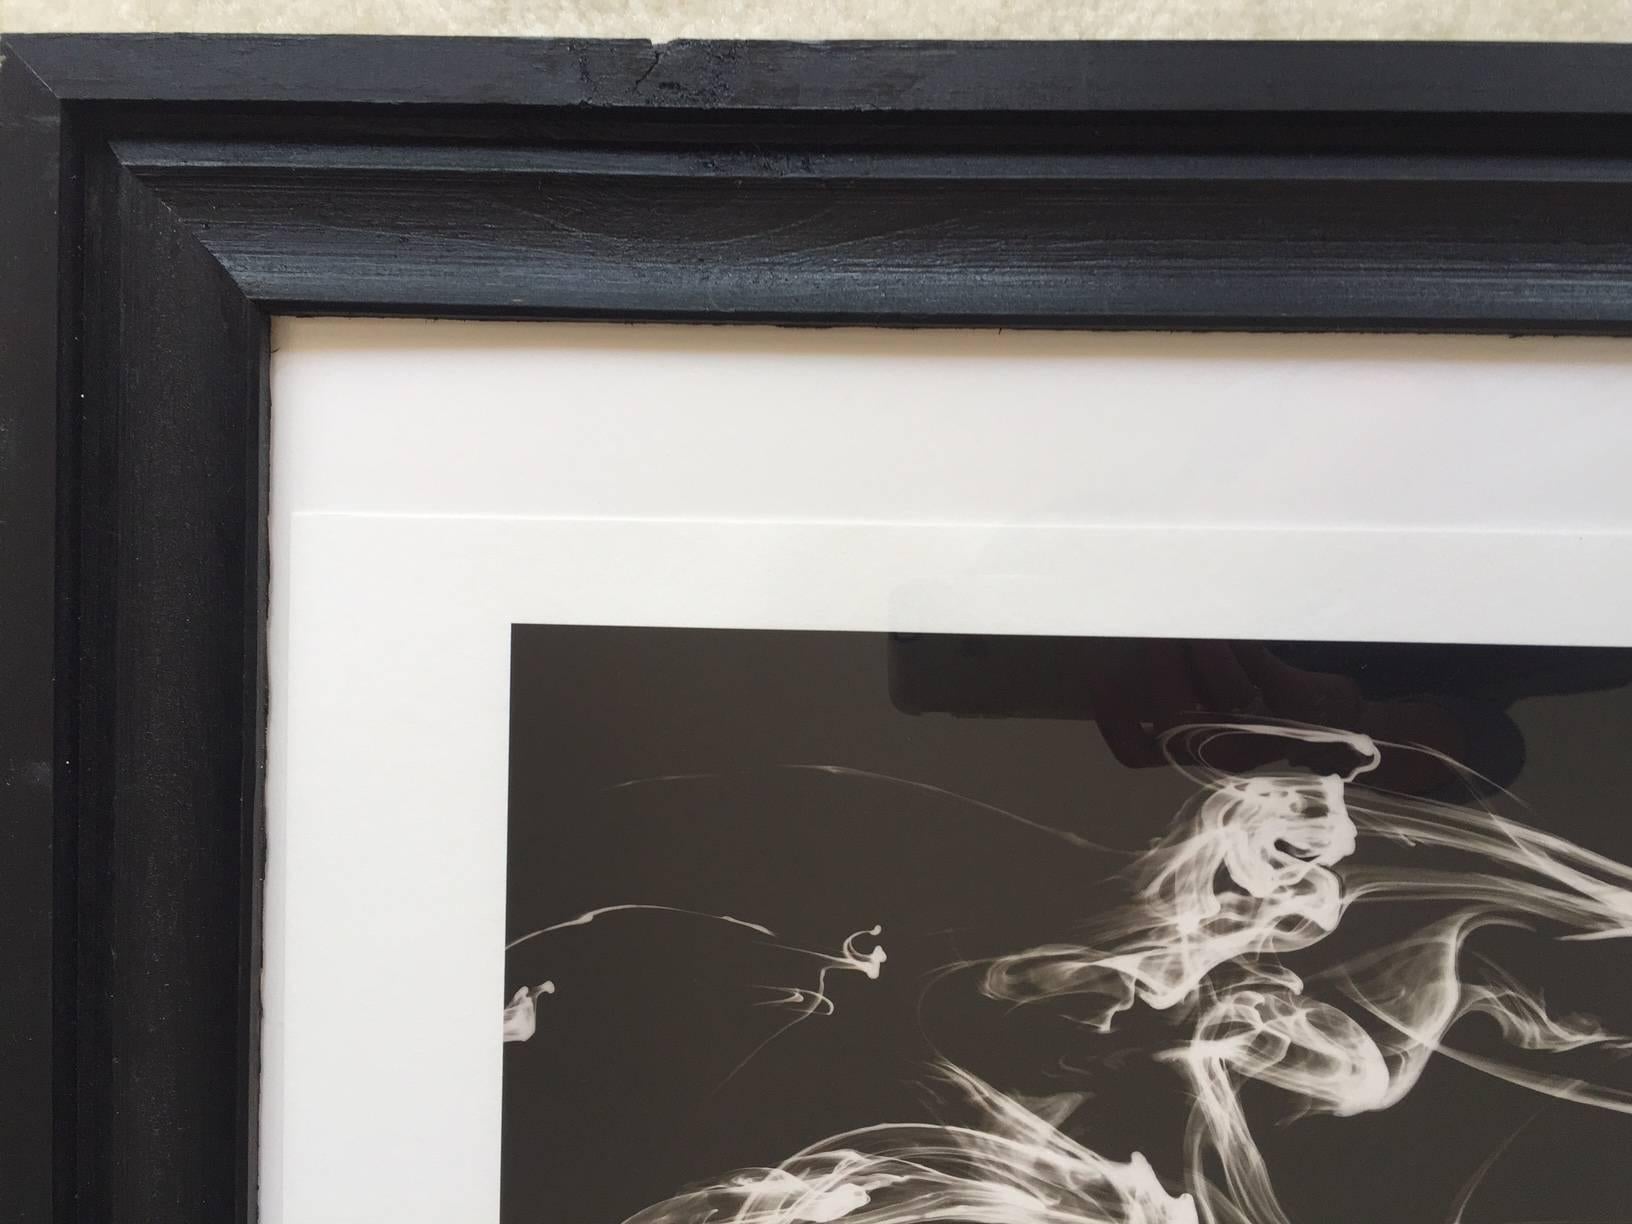 Abstract art photography in black and white - framed in custom made wood frame - Photograph by MAE Curates